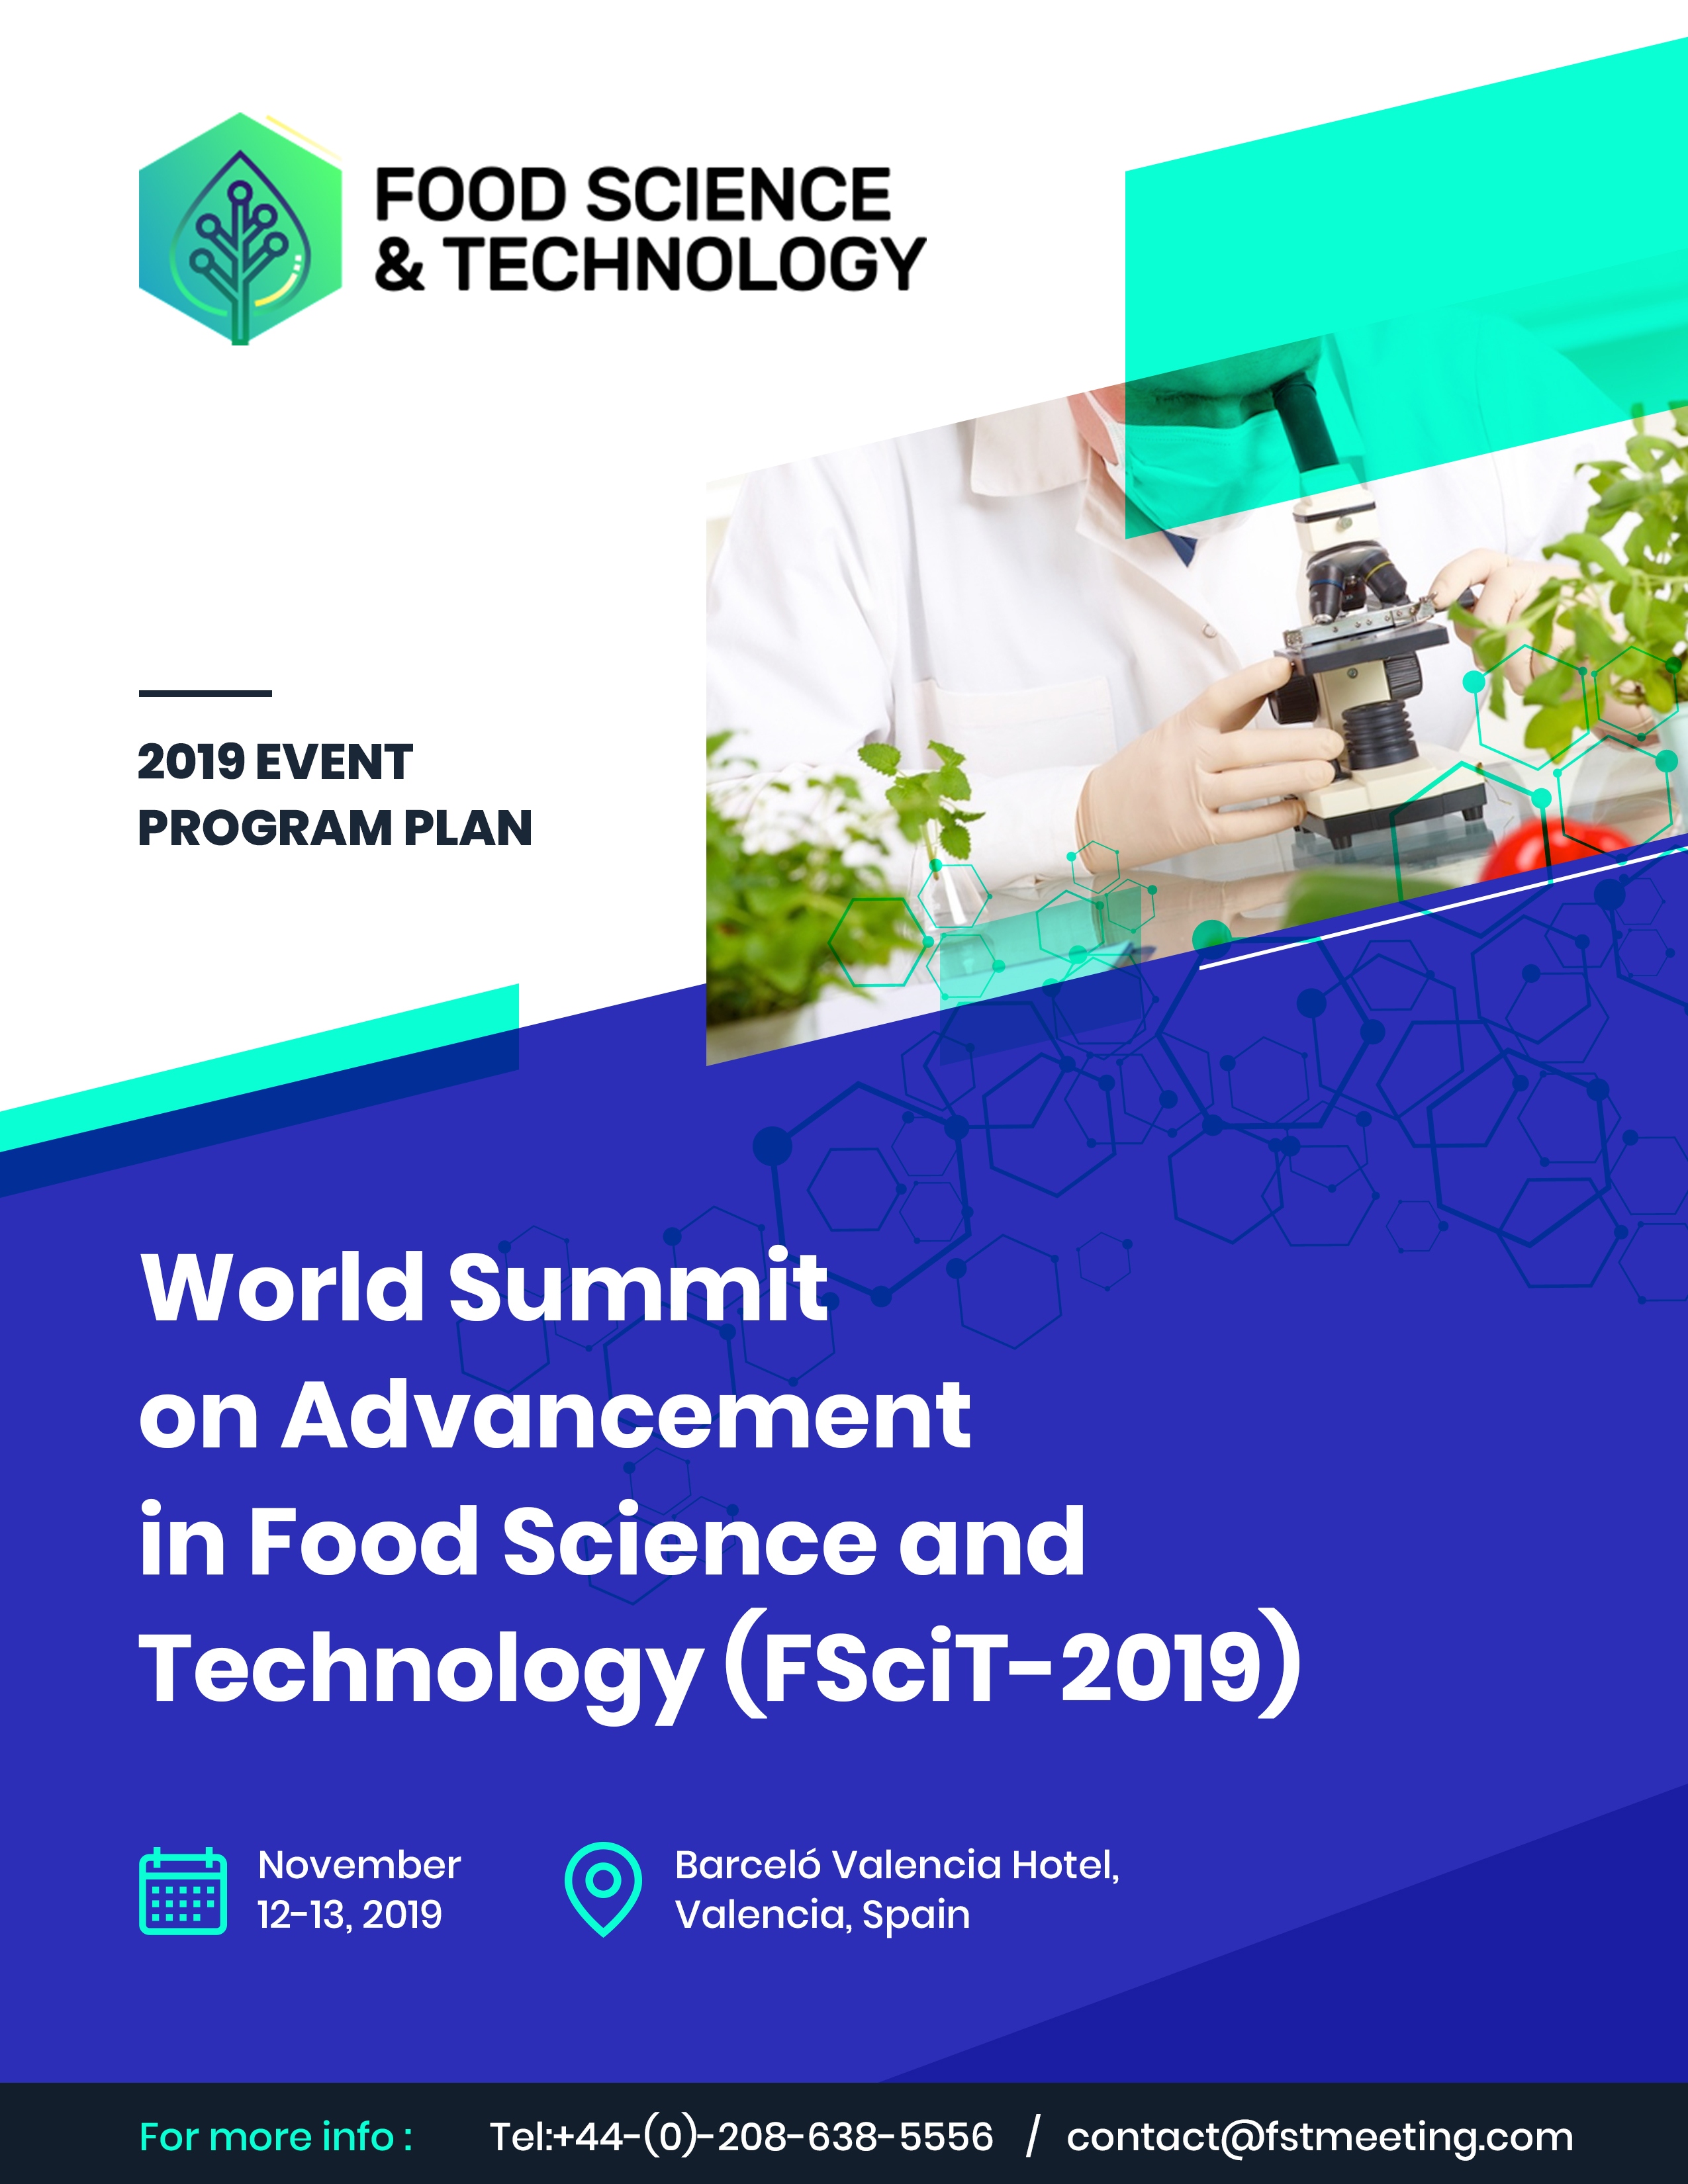 "World Summit on Advances in Food Science and Technology" (FSciT-2019)